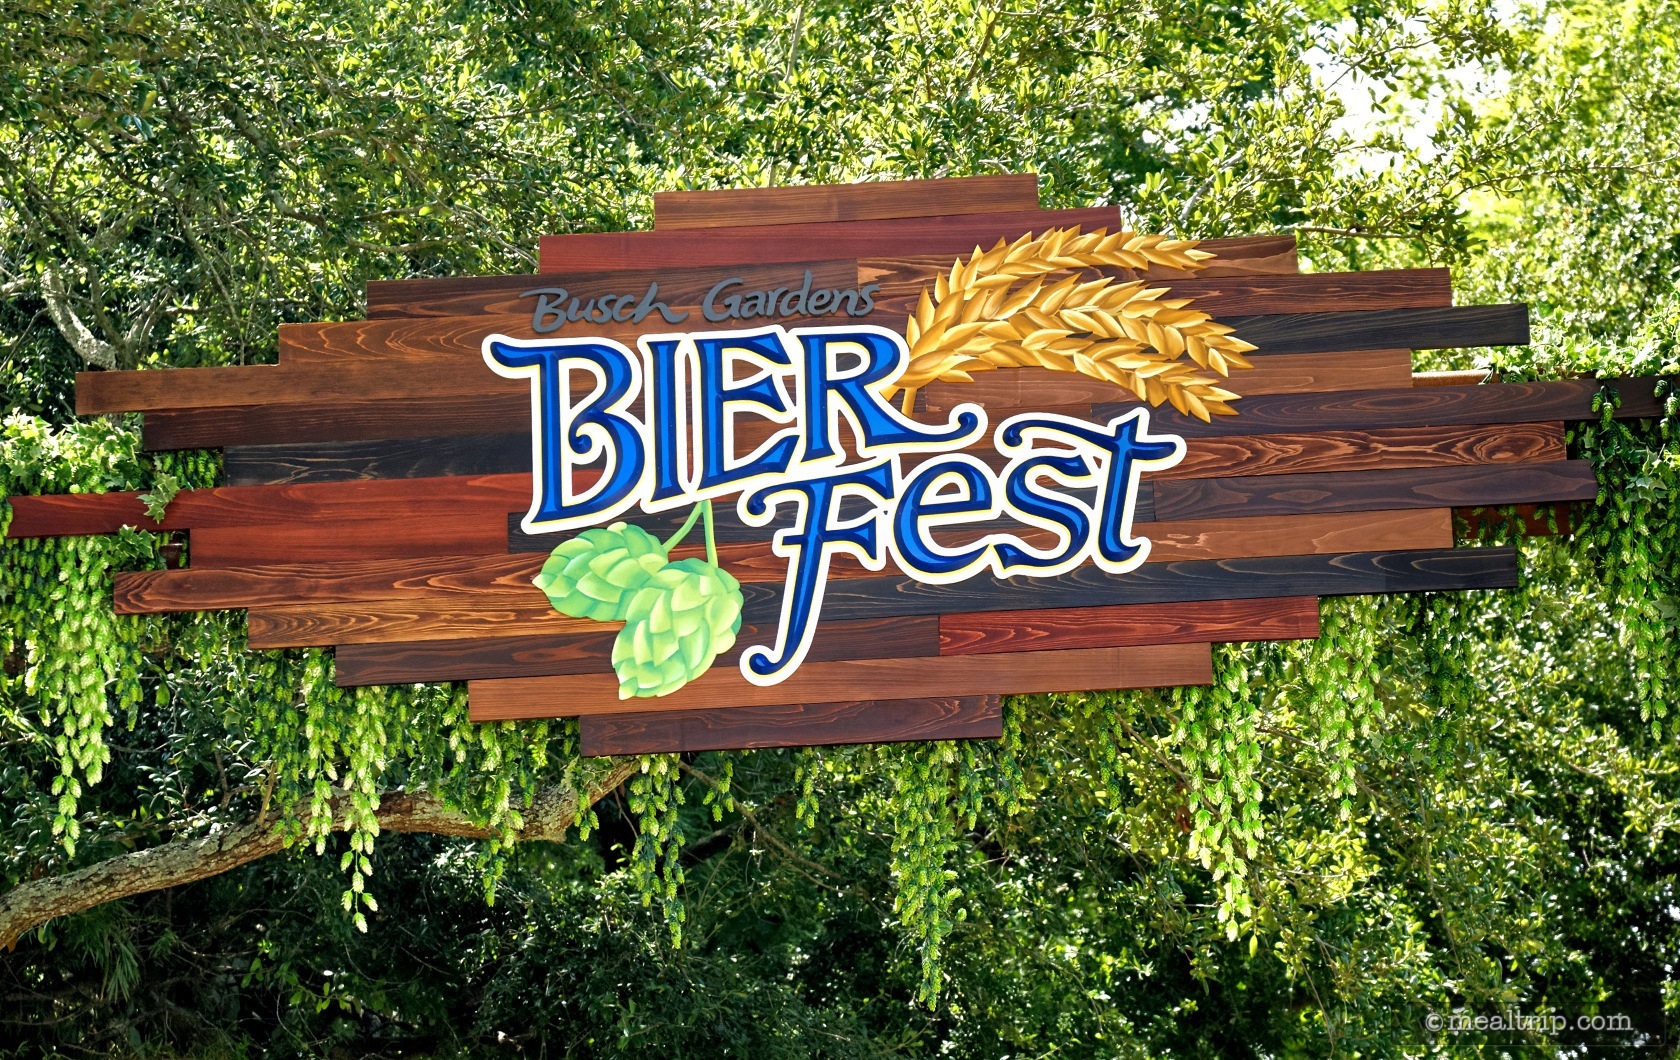 Food & Beer Menu Items for the Busch Gardens, Tampa 2019 Bier Fest (Text List)